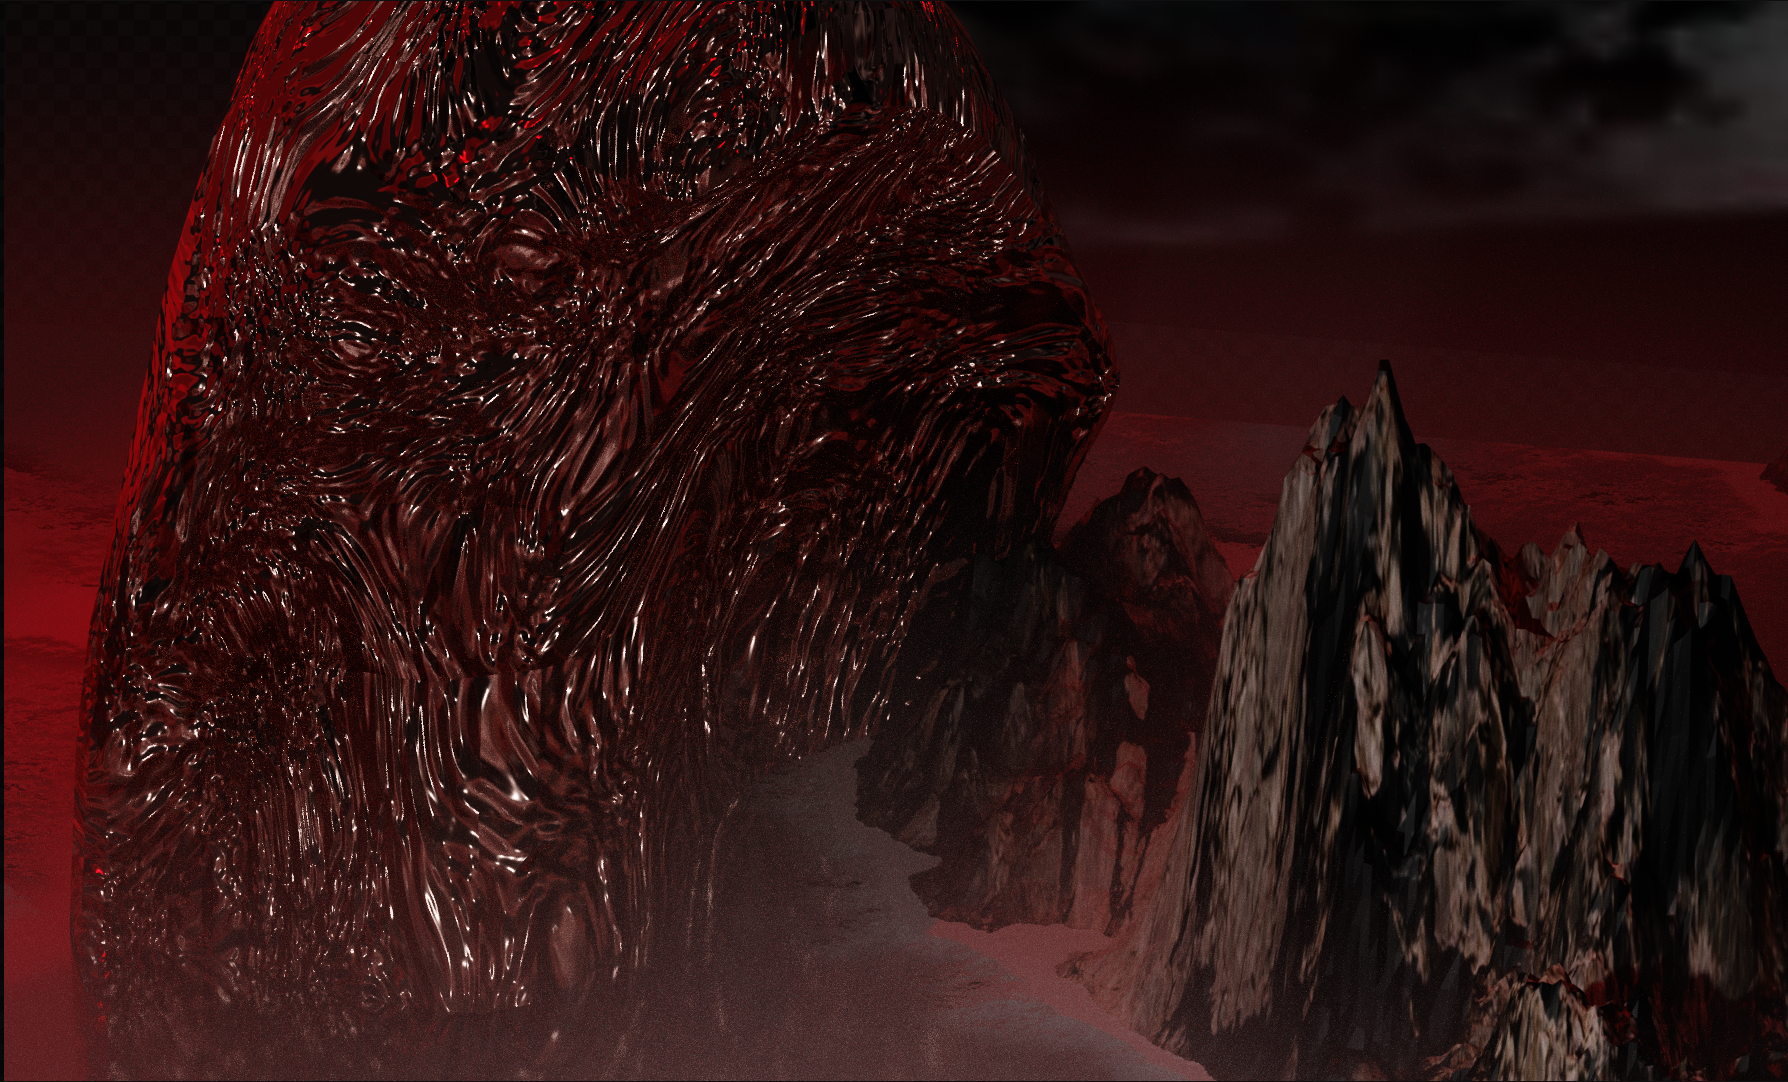 A mountain made of blood and flesh approaching a virtual landscape